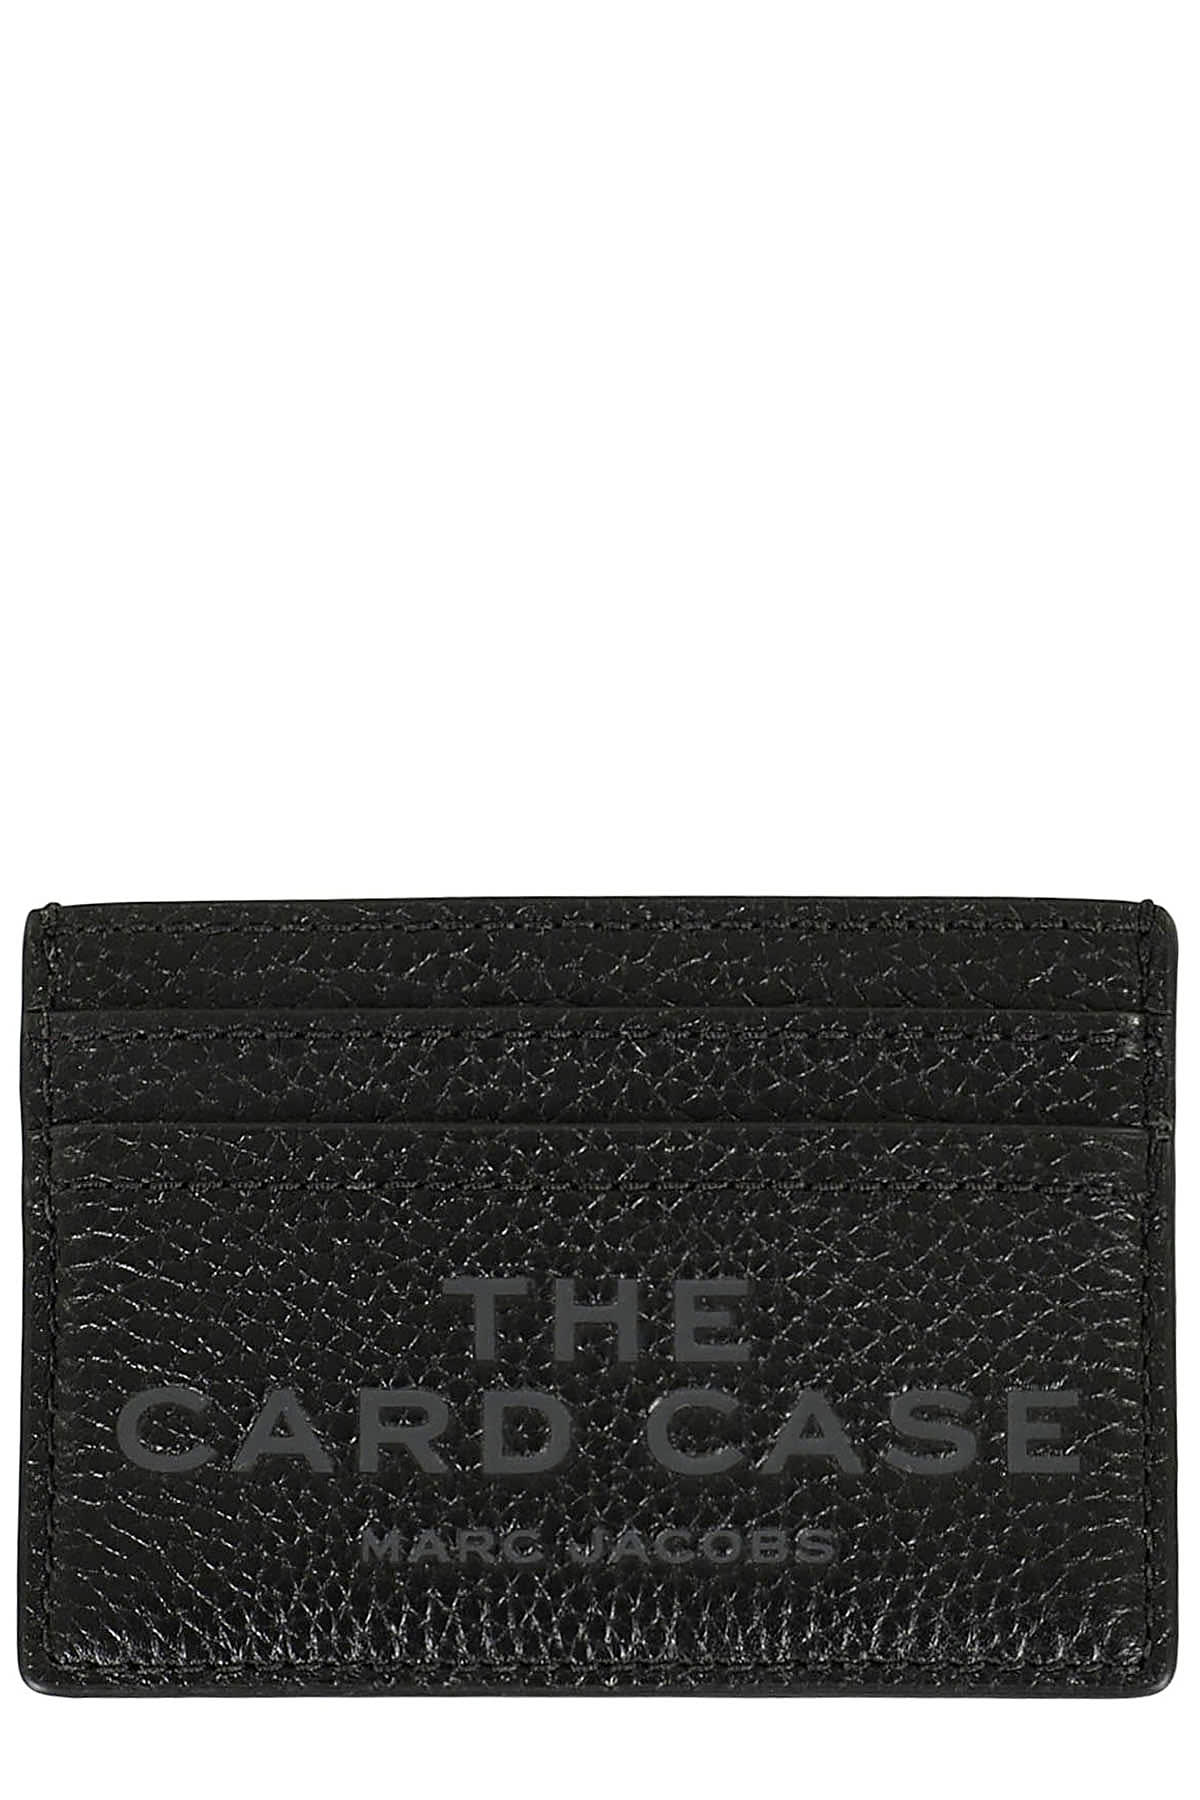 The Card Case